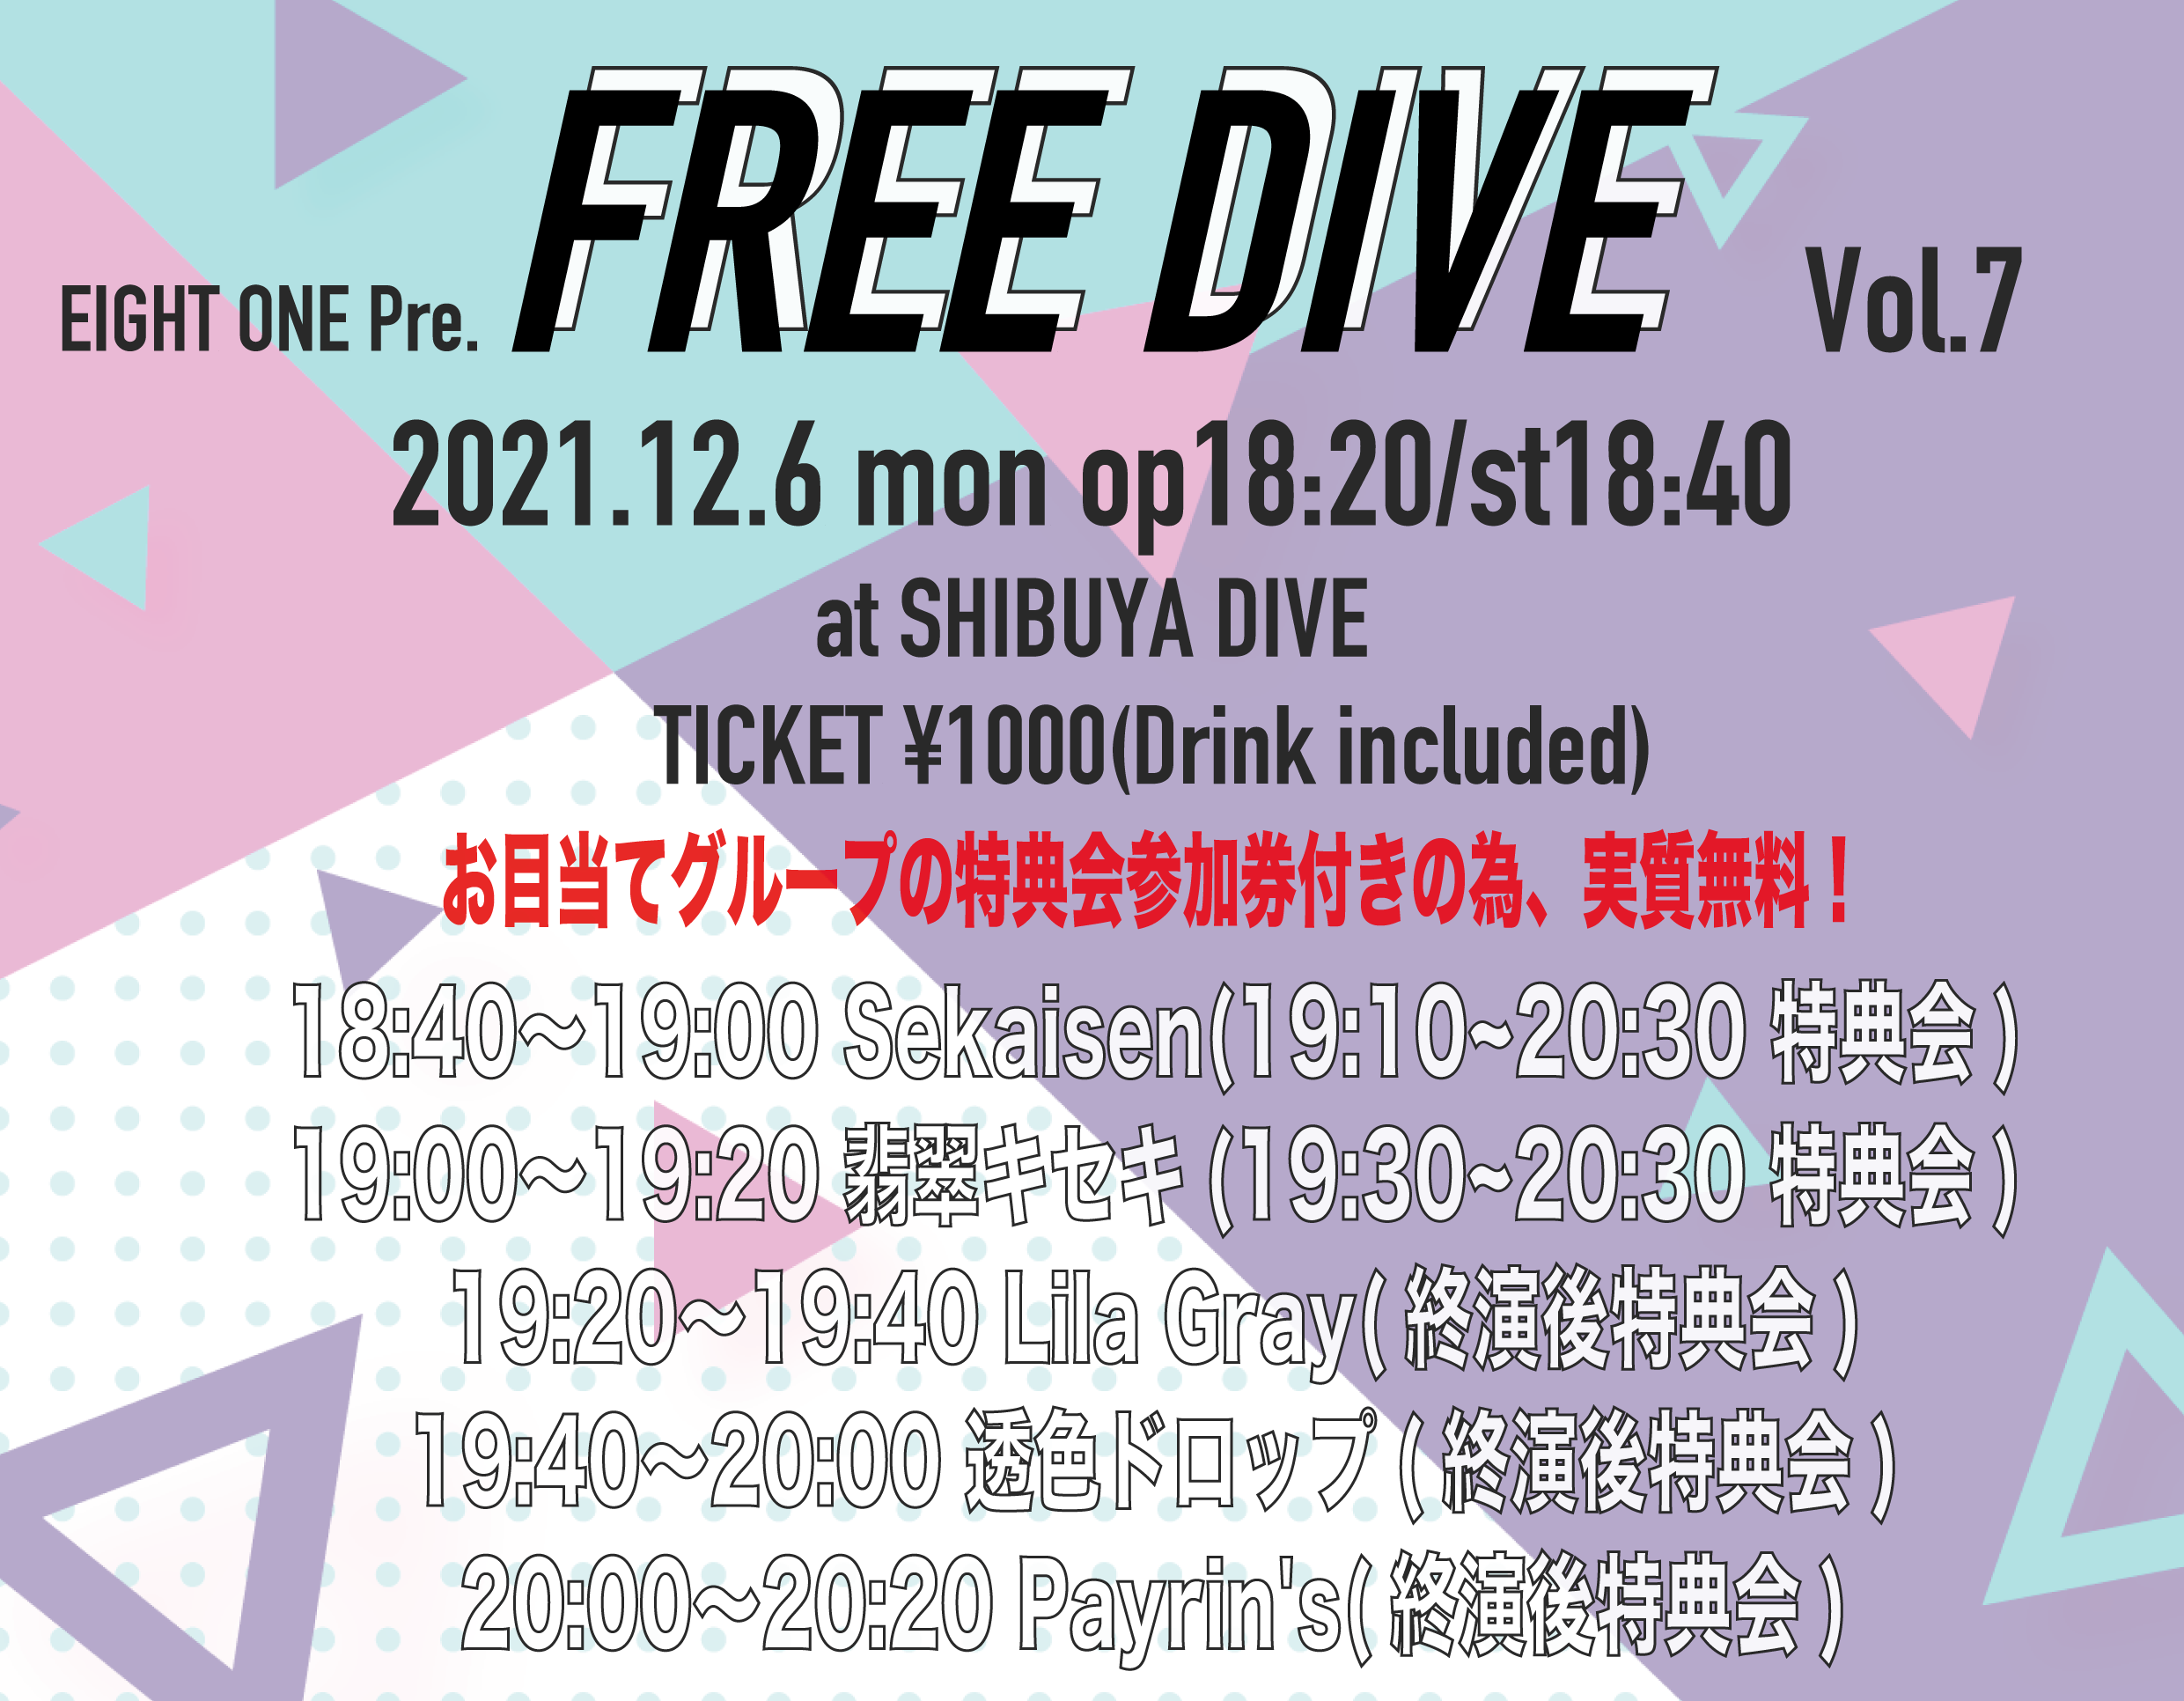 EIGHT ONE Pre.「FREE DIVE」Vol.7